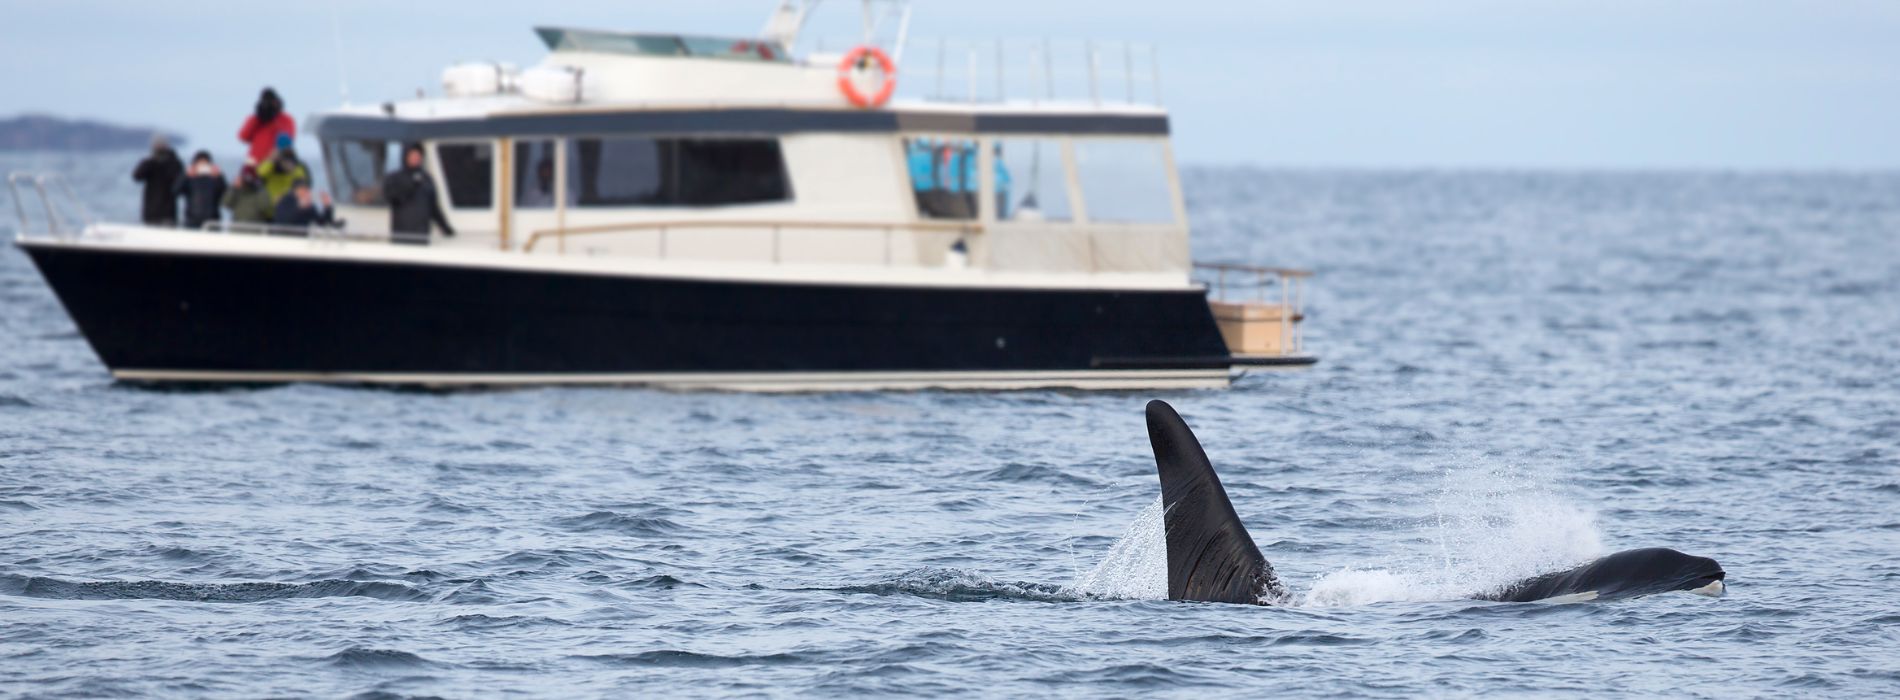 Best Whale Watching Tour In Boston